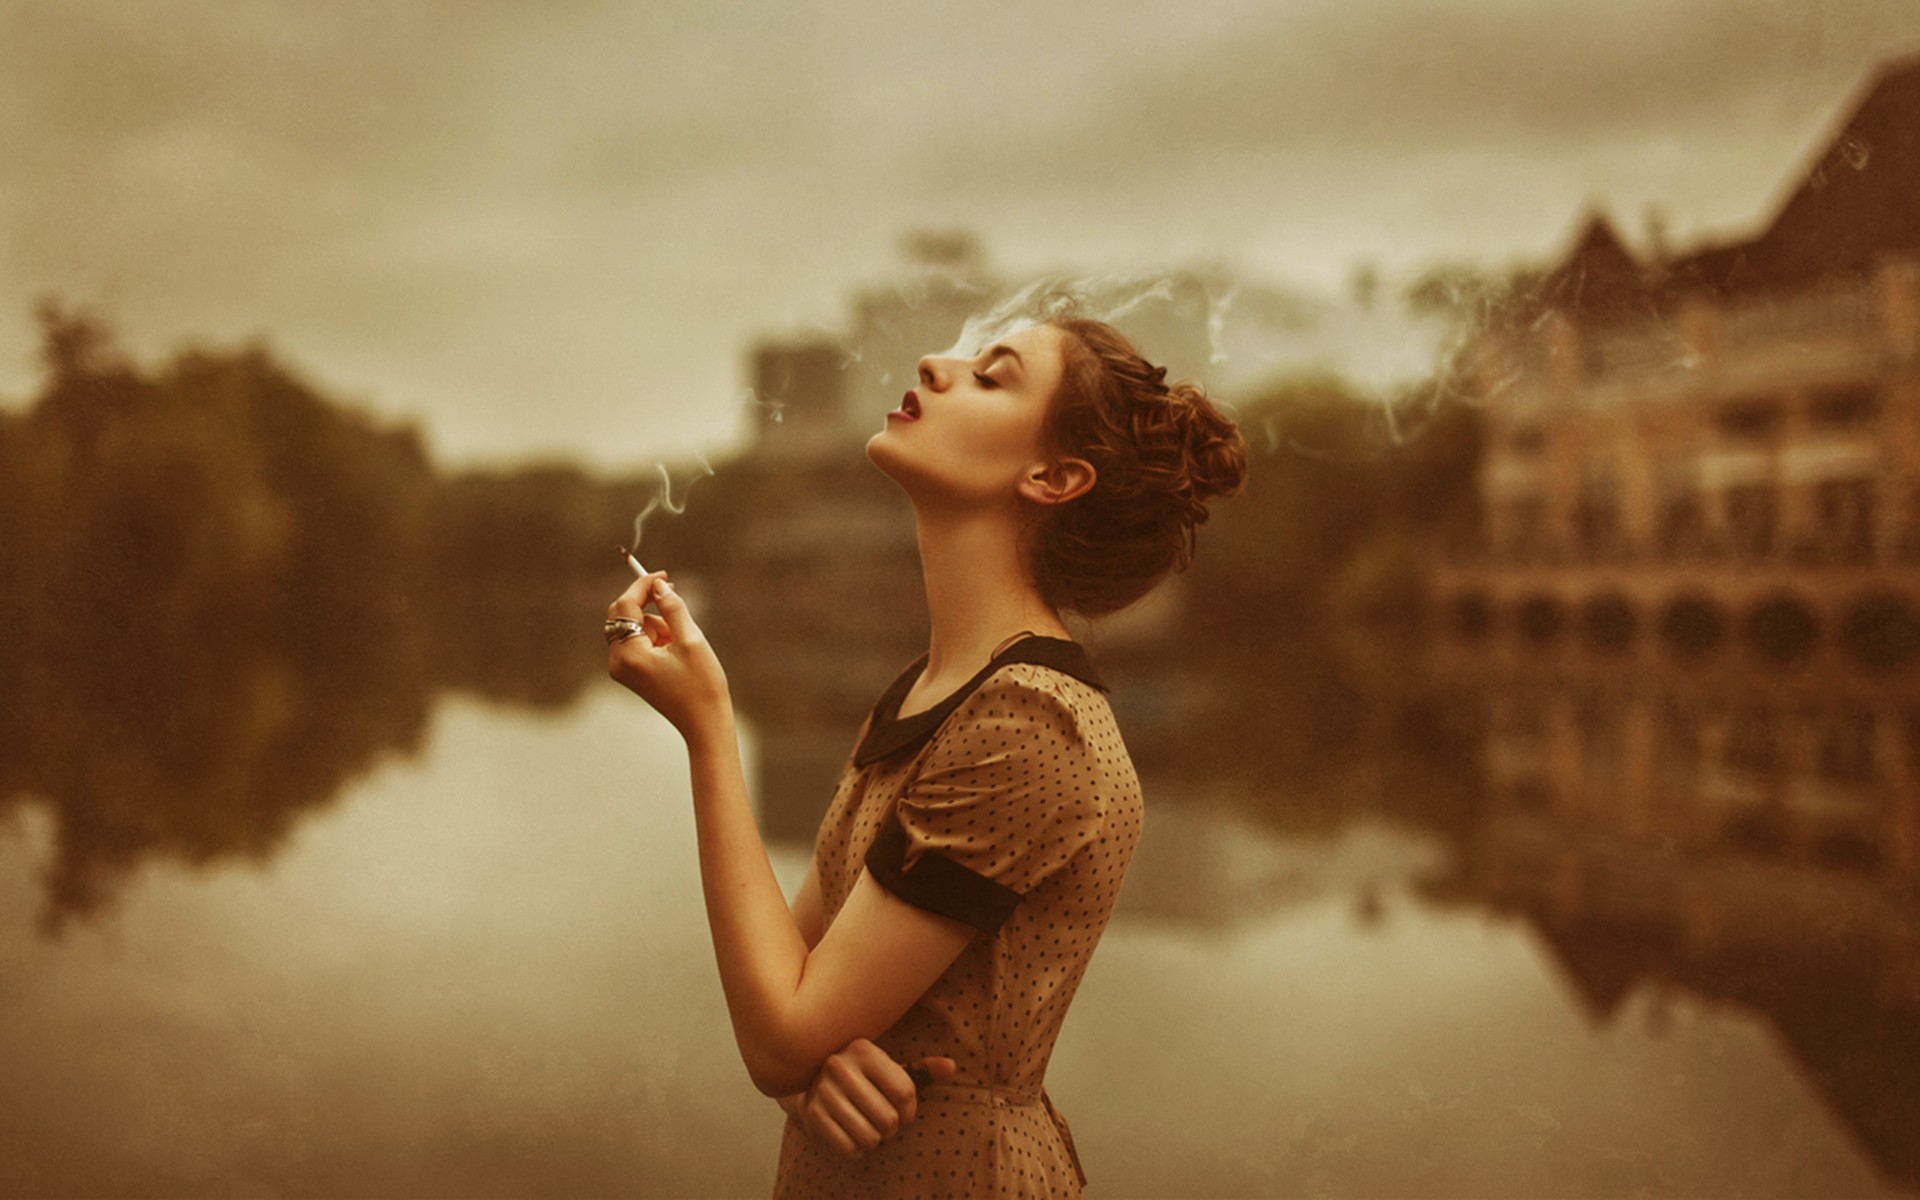 Smoking Women Outdoors Polka Dots Cigarettes Closed Eyes Looking Up Women Sepia Arms On Chest 1920x1200